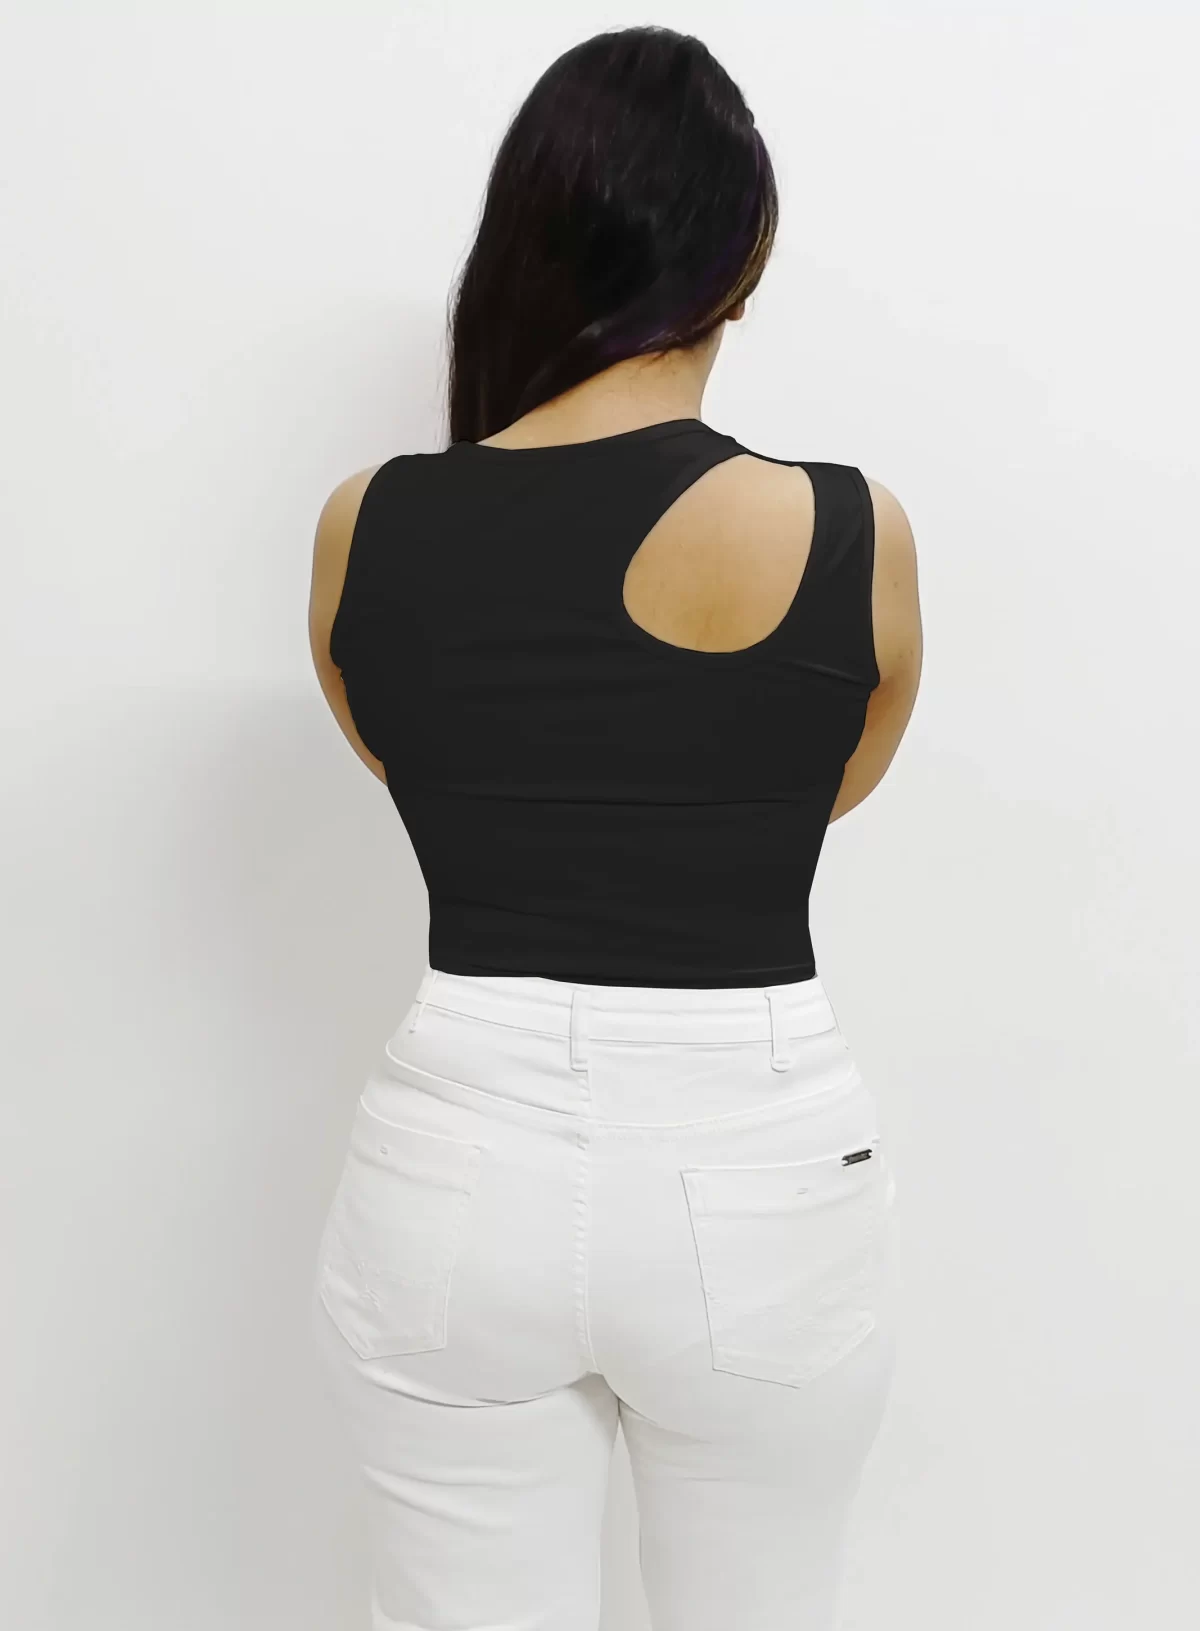 Black Stylish & Chic Cut Out Crop Top3